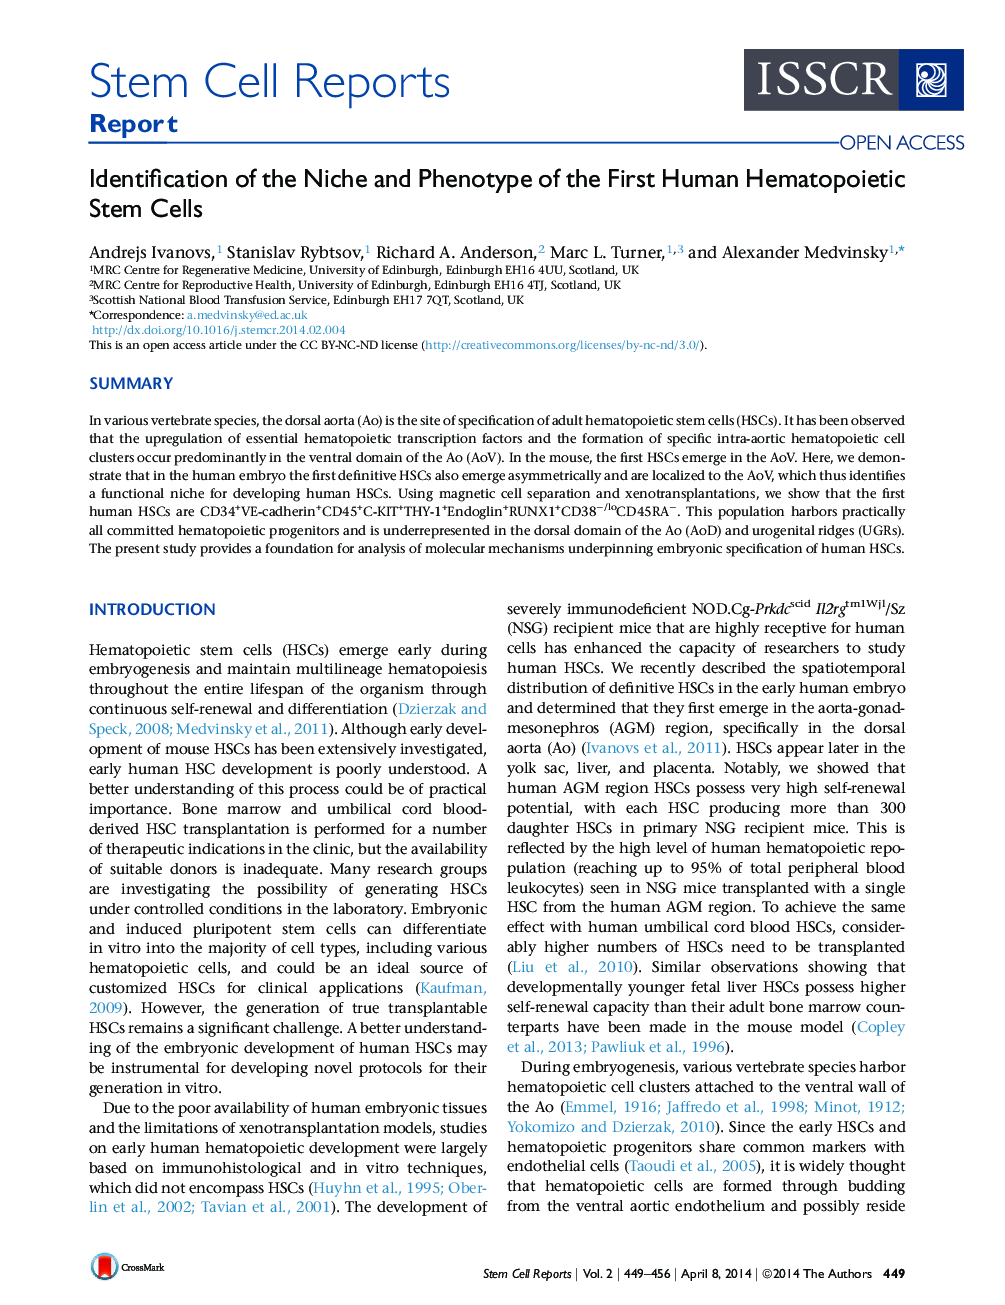 Identification of the Niche and Phenotype of the First Human Hematopoietic Stem Cells 